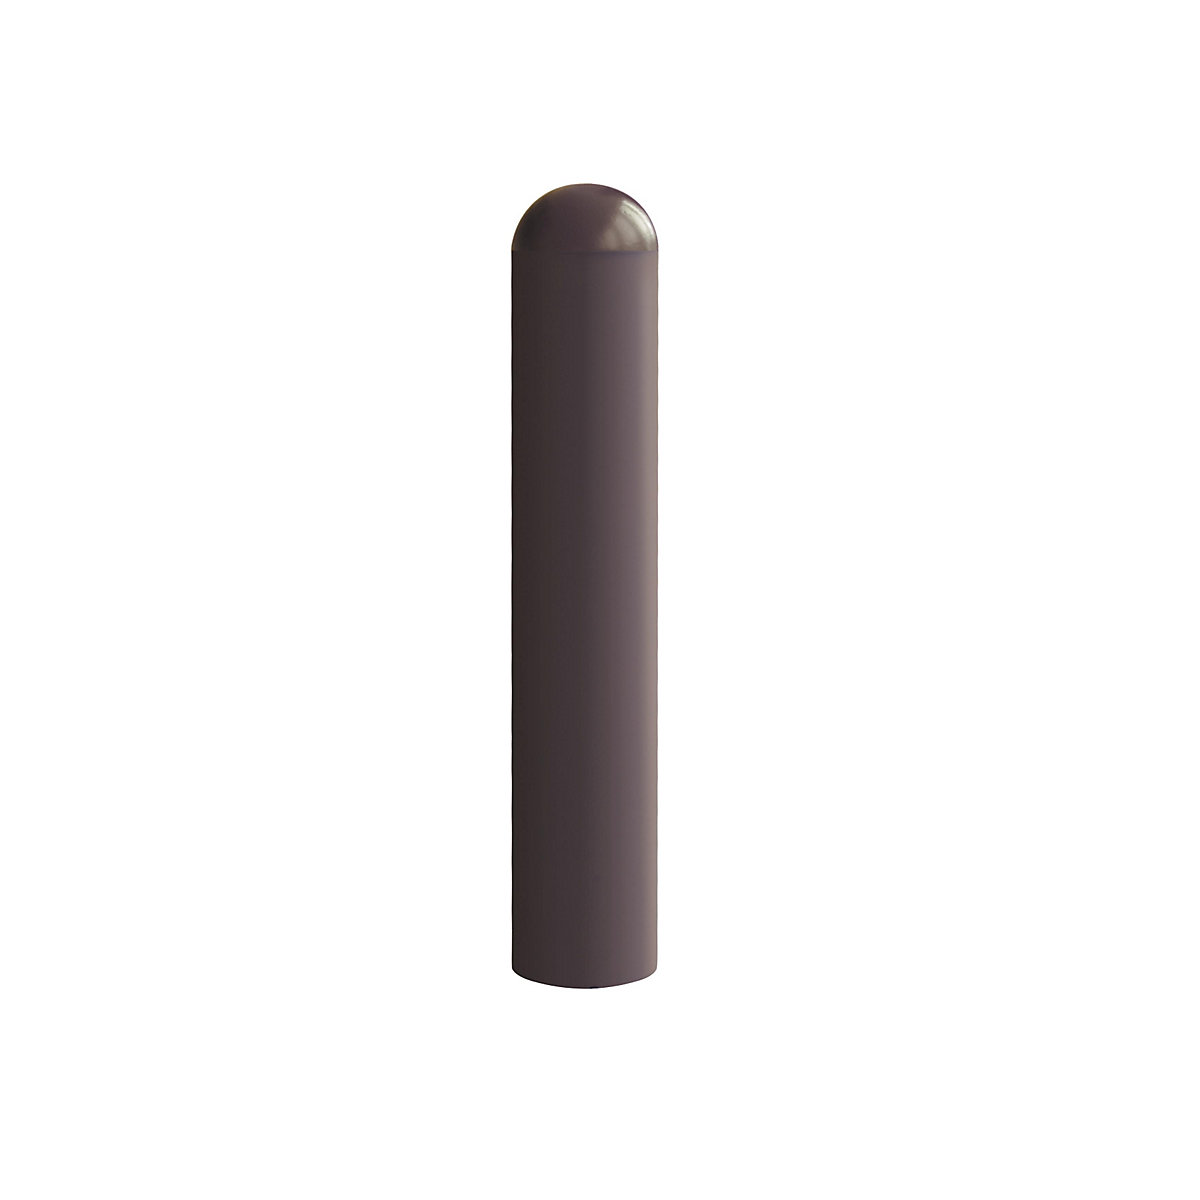 City bollard, height 1250 mm, allows removal, with triangle lock, Ø 108 mm, 2 chain eyelets-5